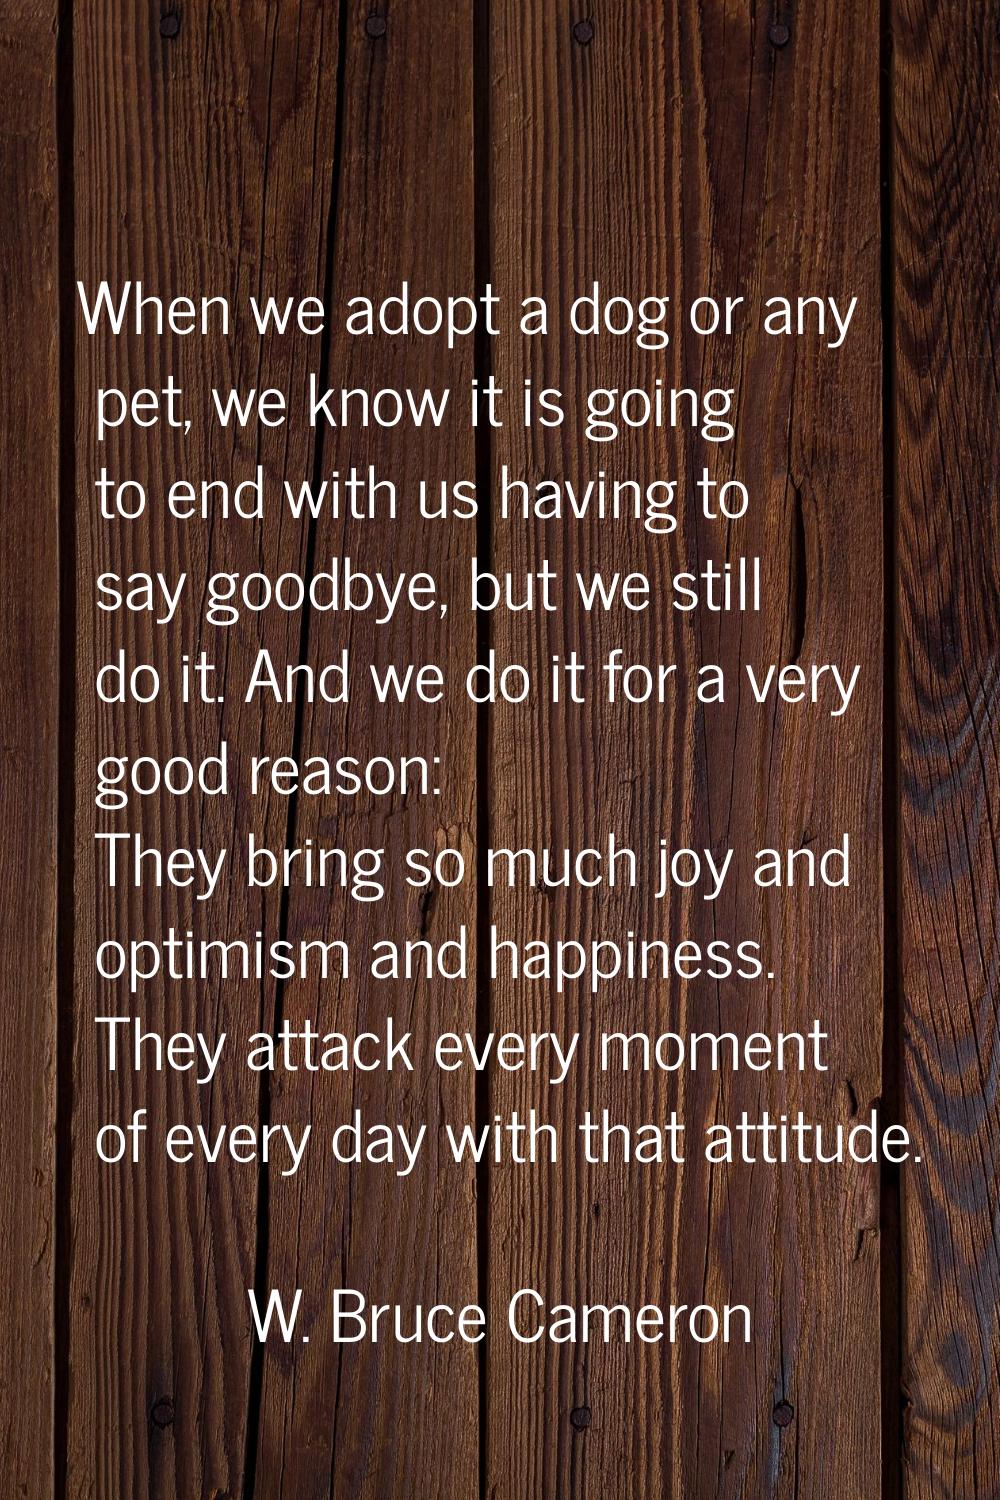 When we adopt a dog or any pet, we know it is going to end with us having to say goodbye, but we st